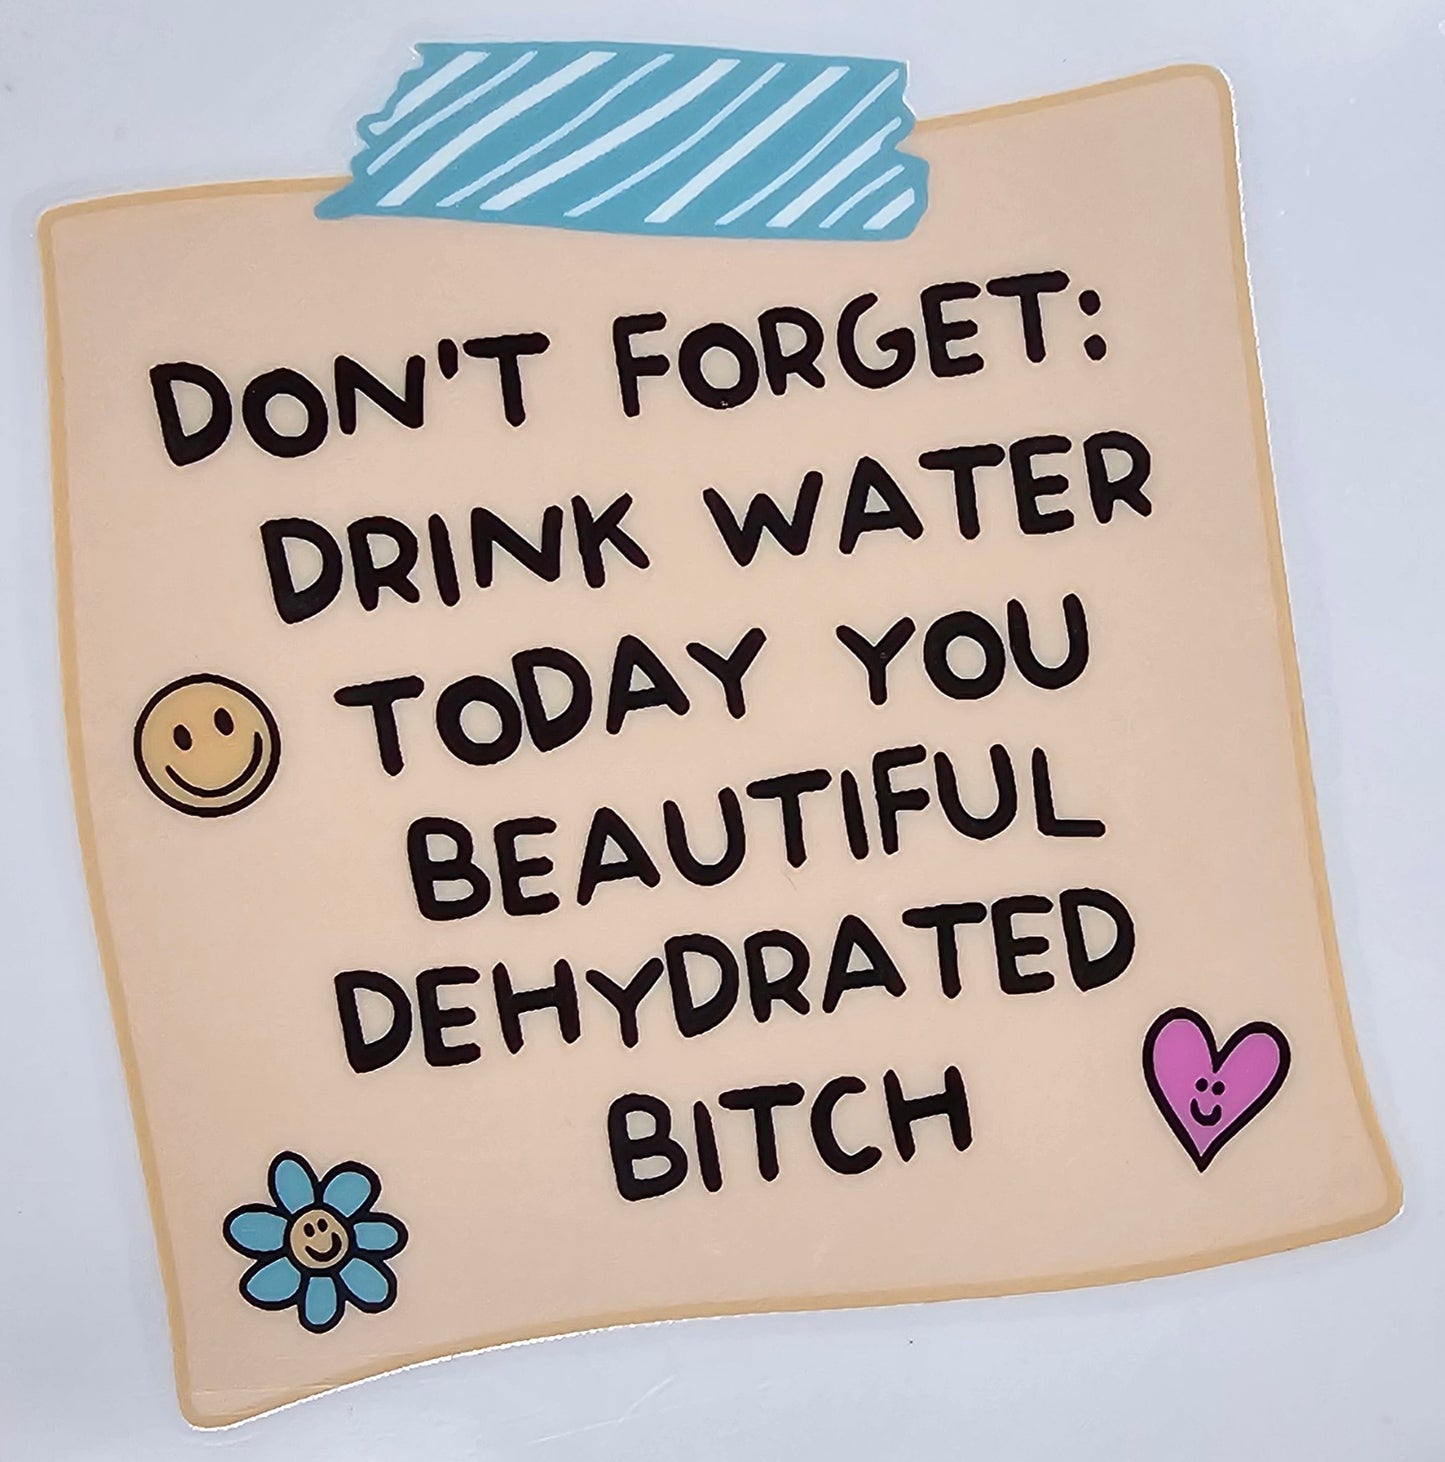 'Don't Forget: Drink Water Today You Beautiful Dehydrated B' Post It Note UV Transfer